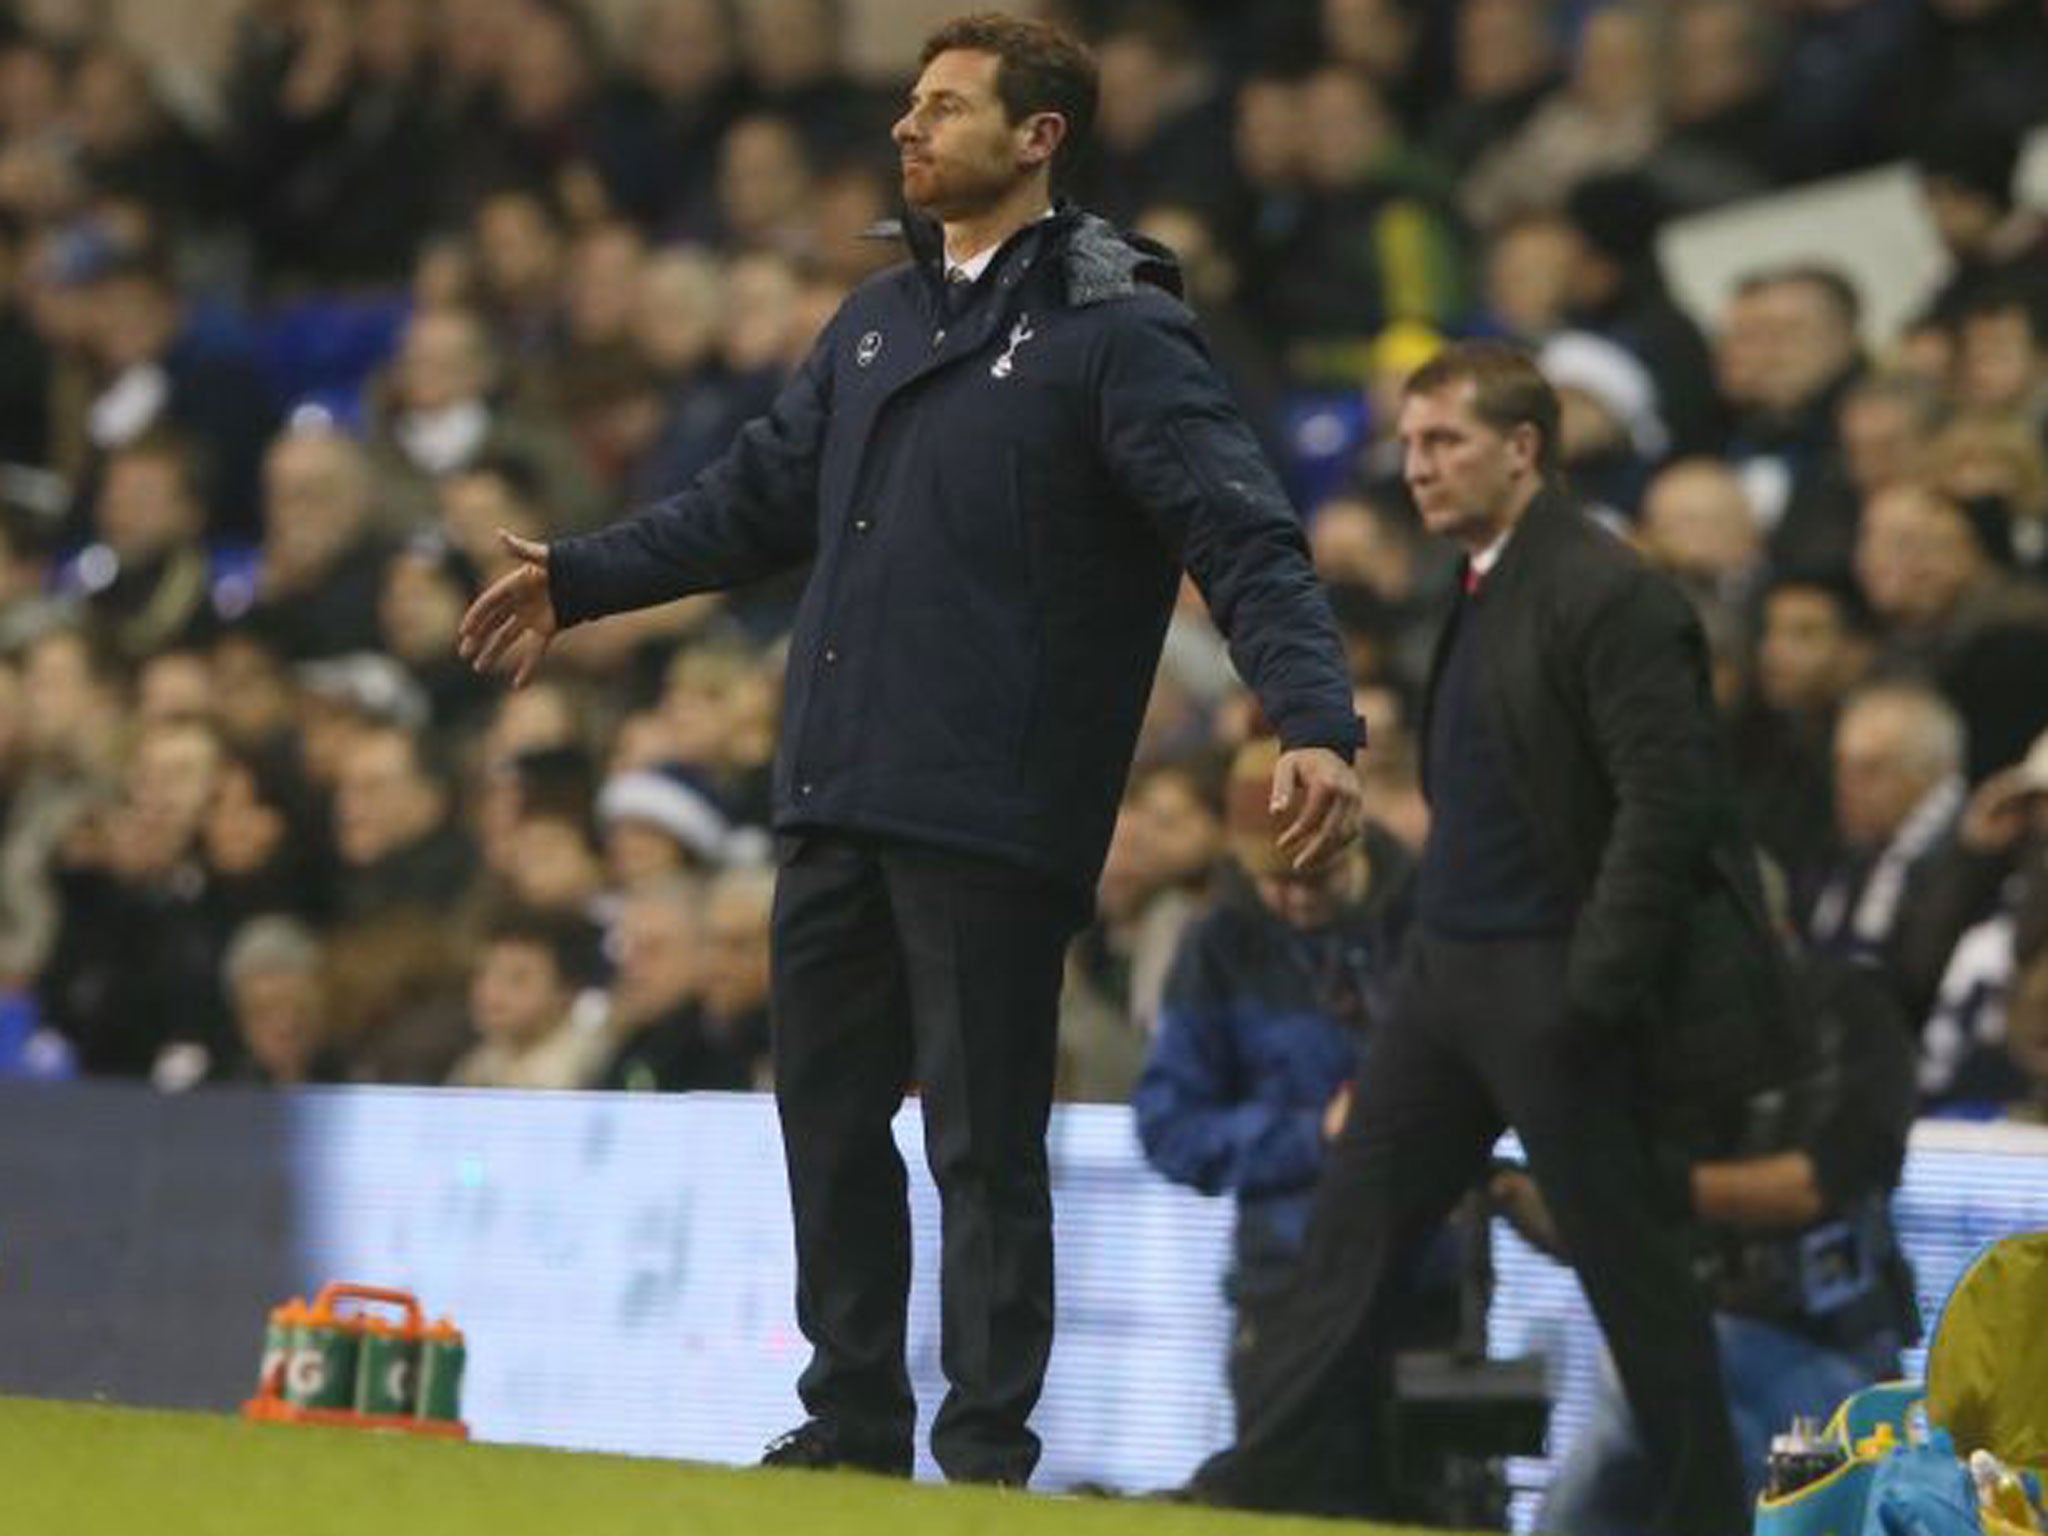 Tottenham's manager Andre Villas-Boas puts his arms out in frustration from the touchline on Sunday